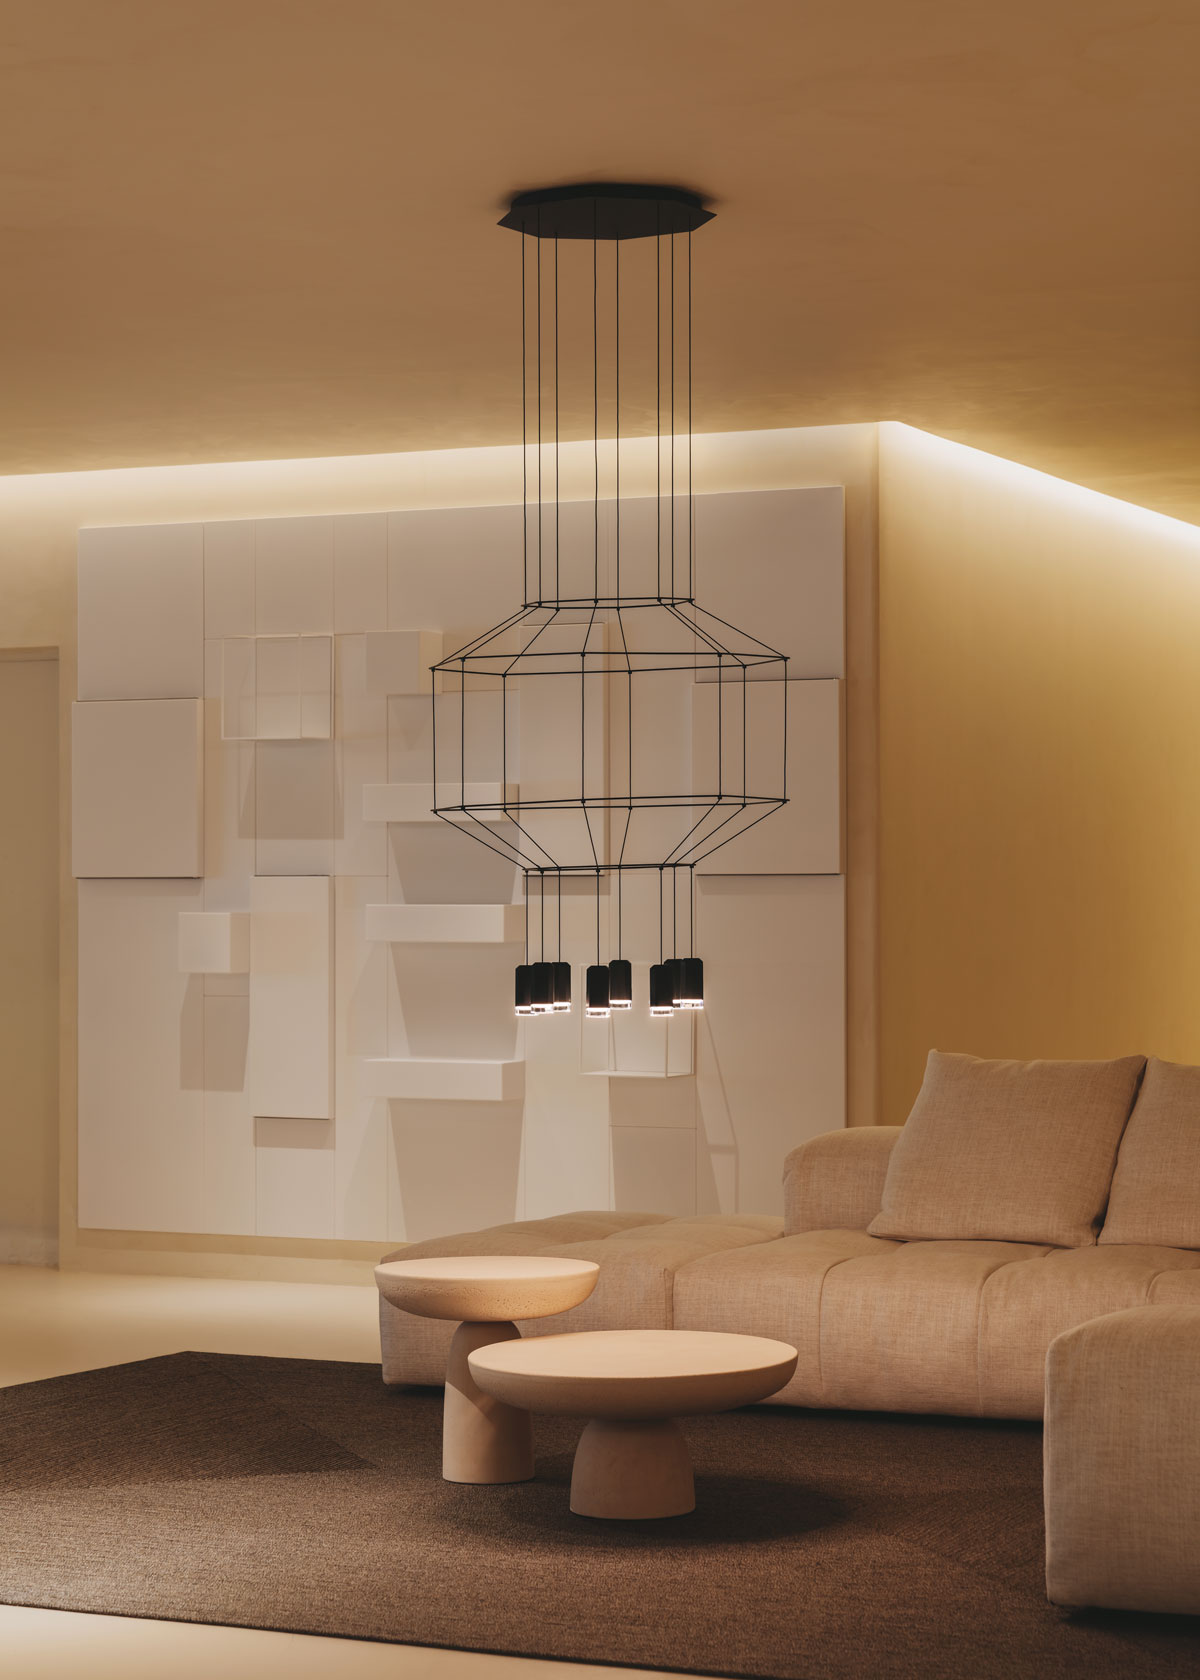 Vibia The Edit - Atmospheres designed for winter wellbeing - Wireflow